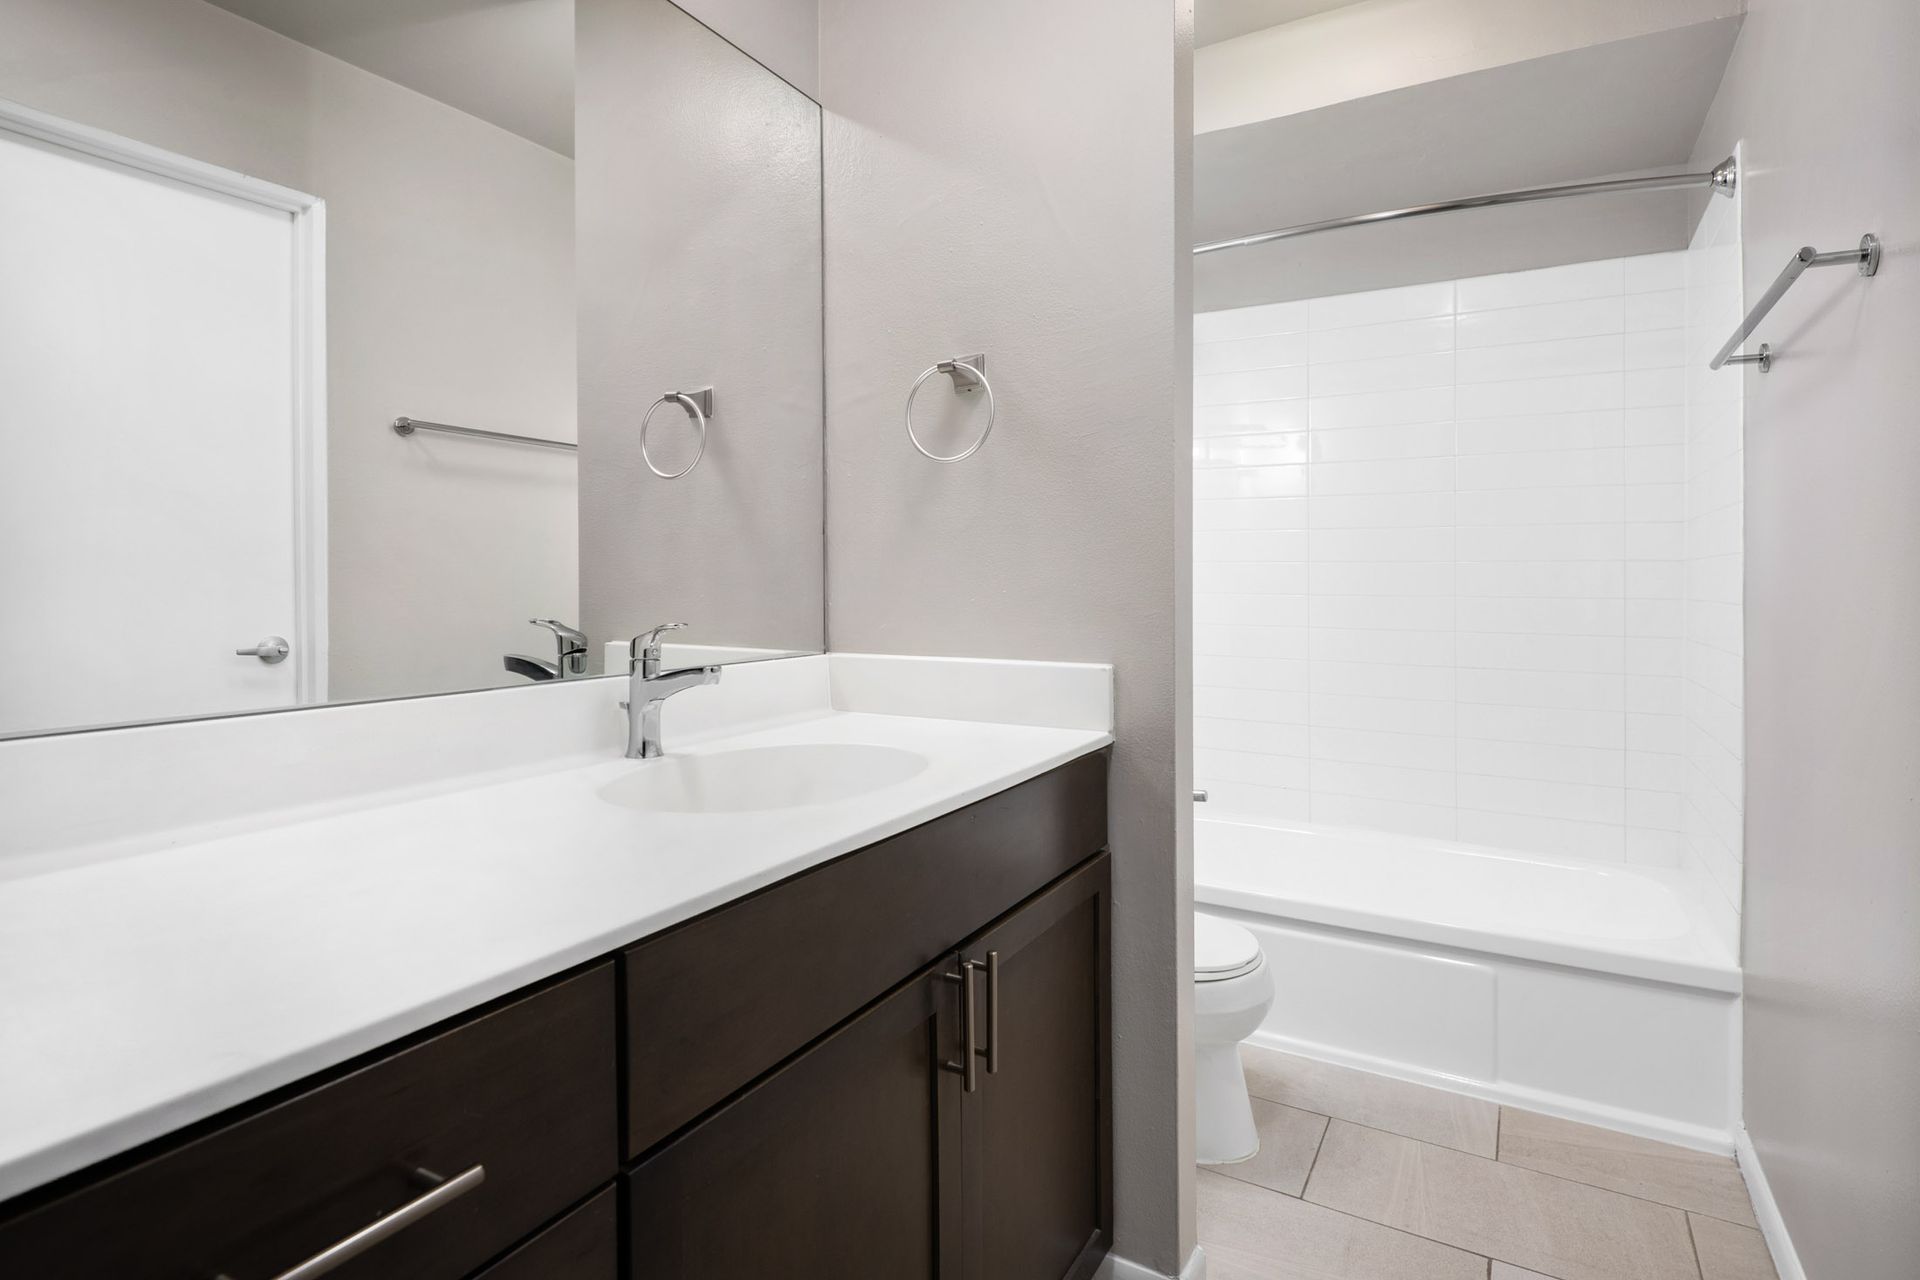 A bathroom with a sink , toilet , and bathtub at Reside on North Park.